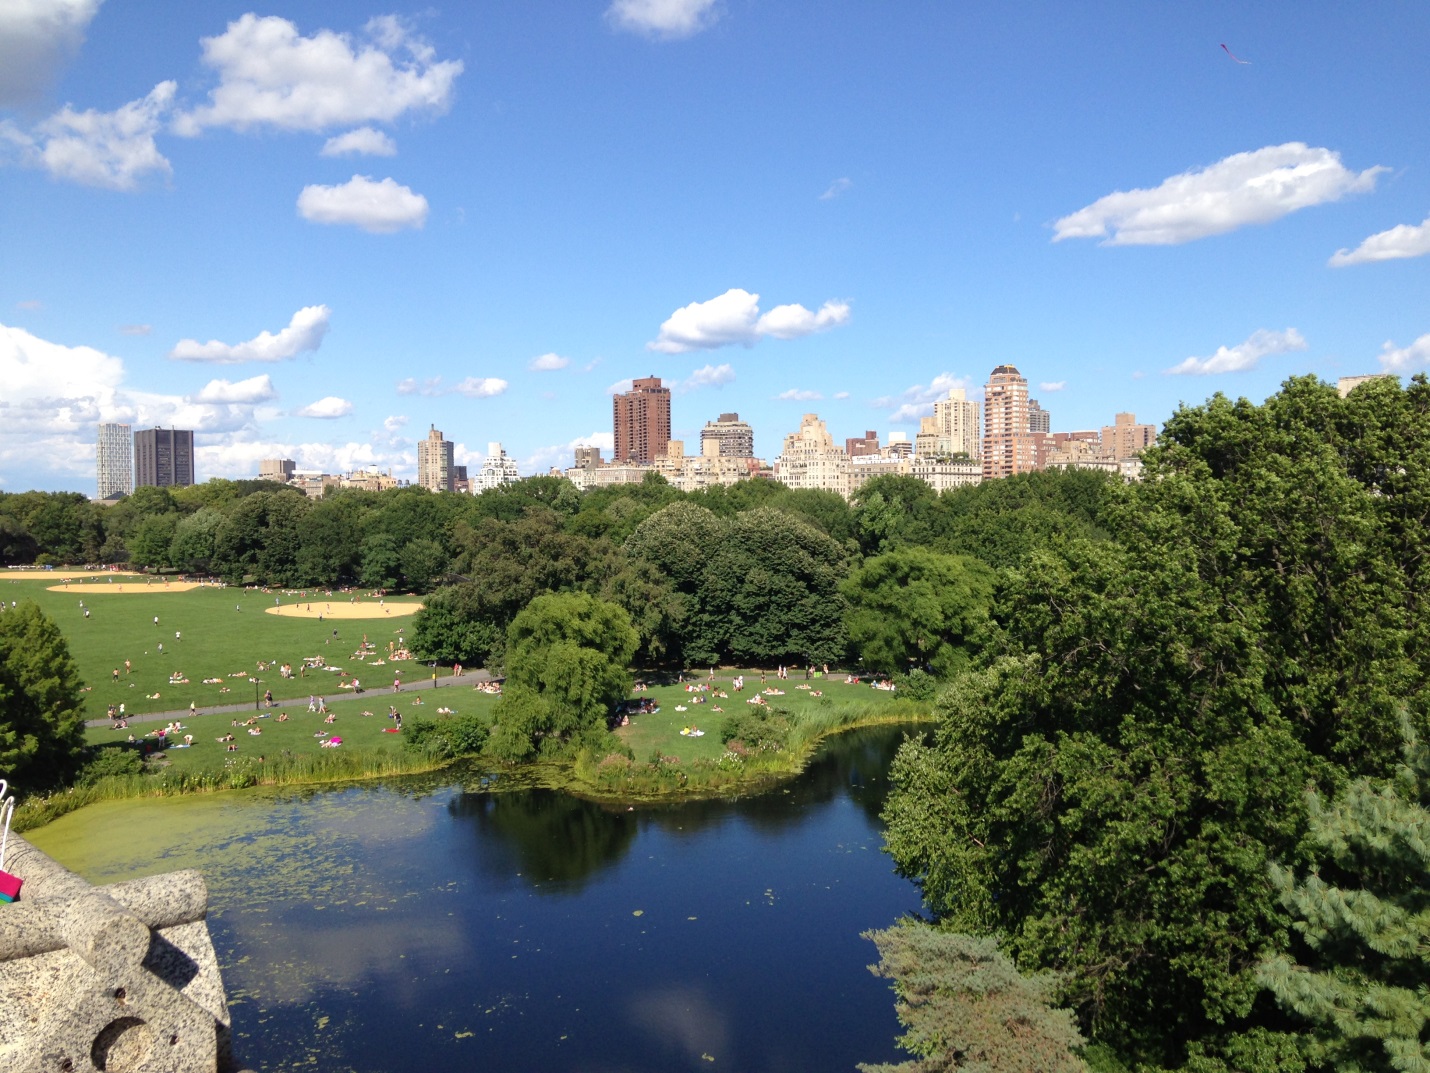 Great view of Central Park in New York City